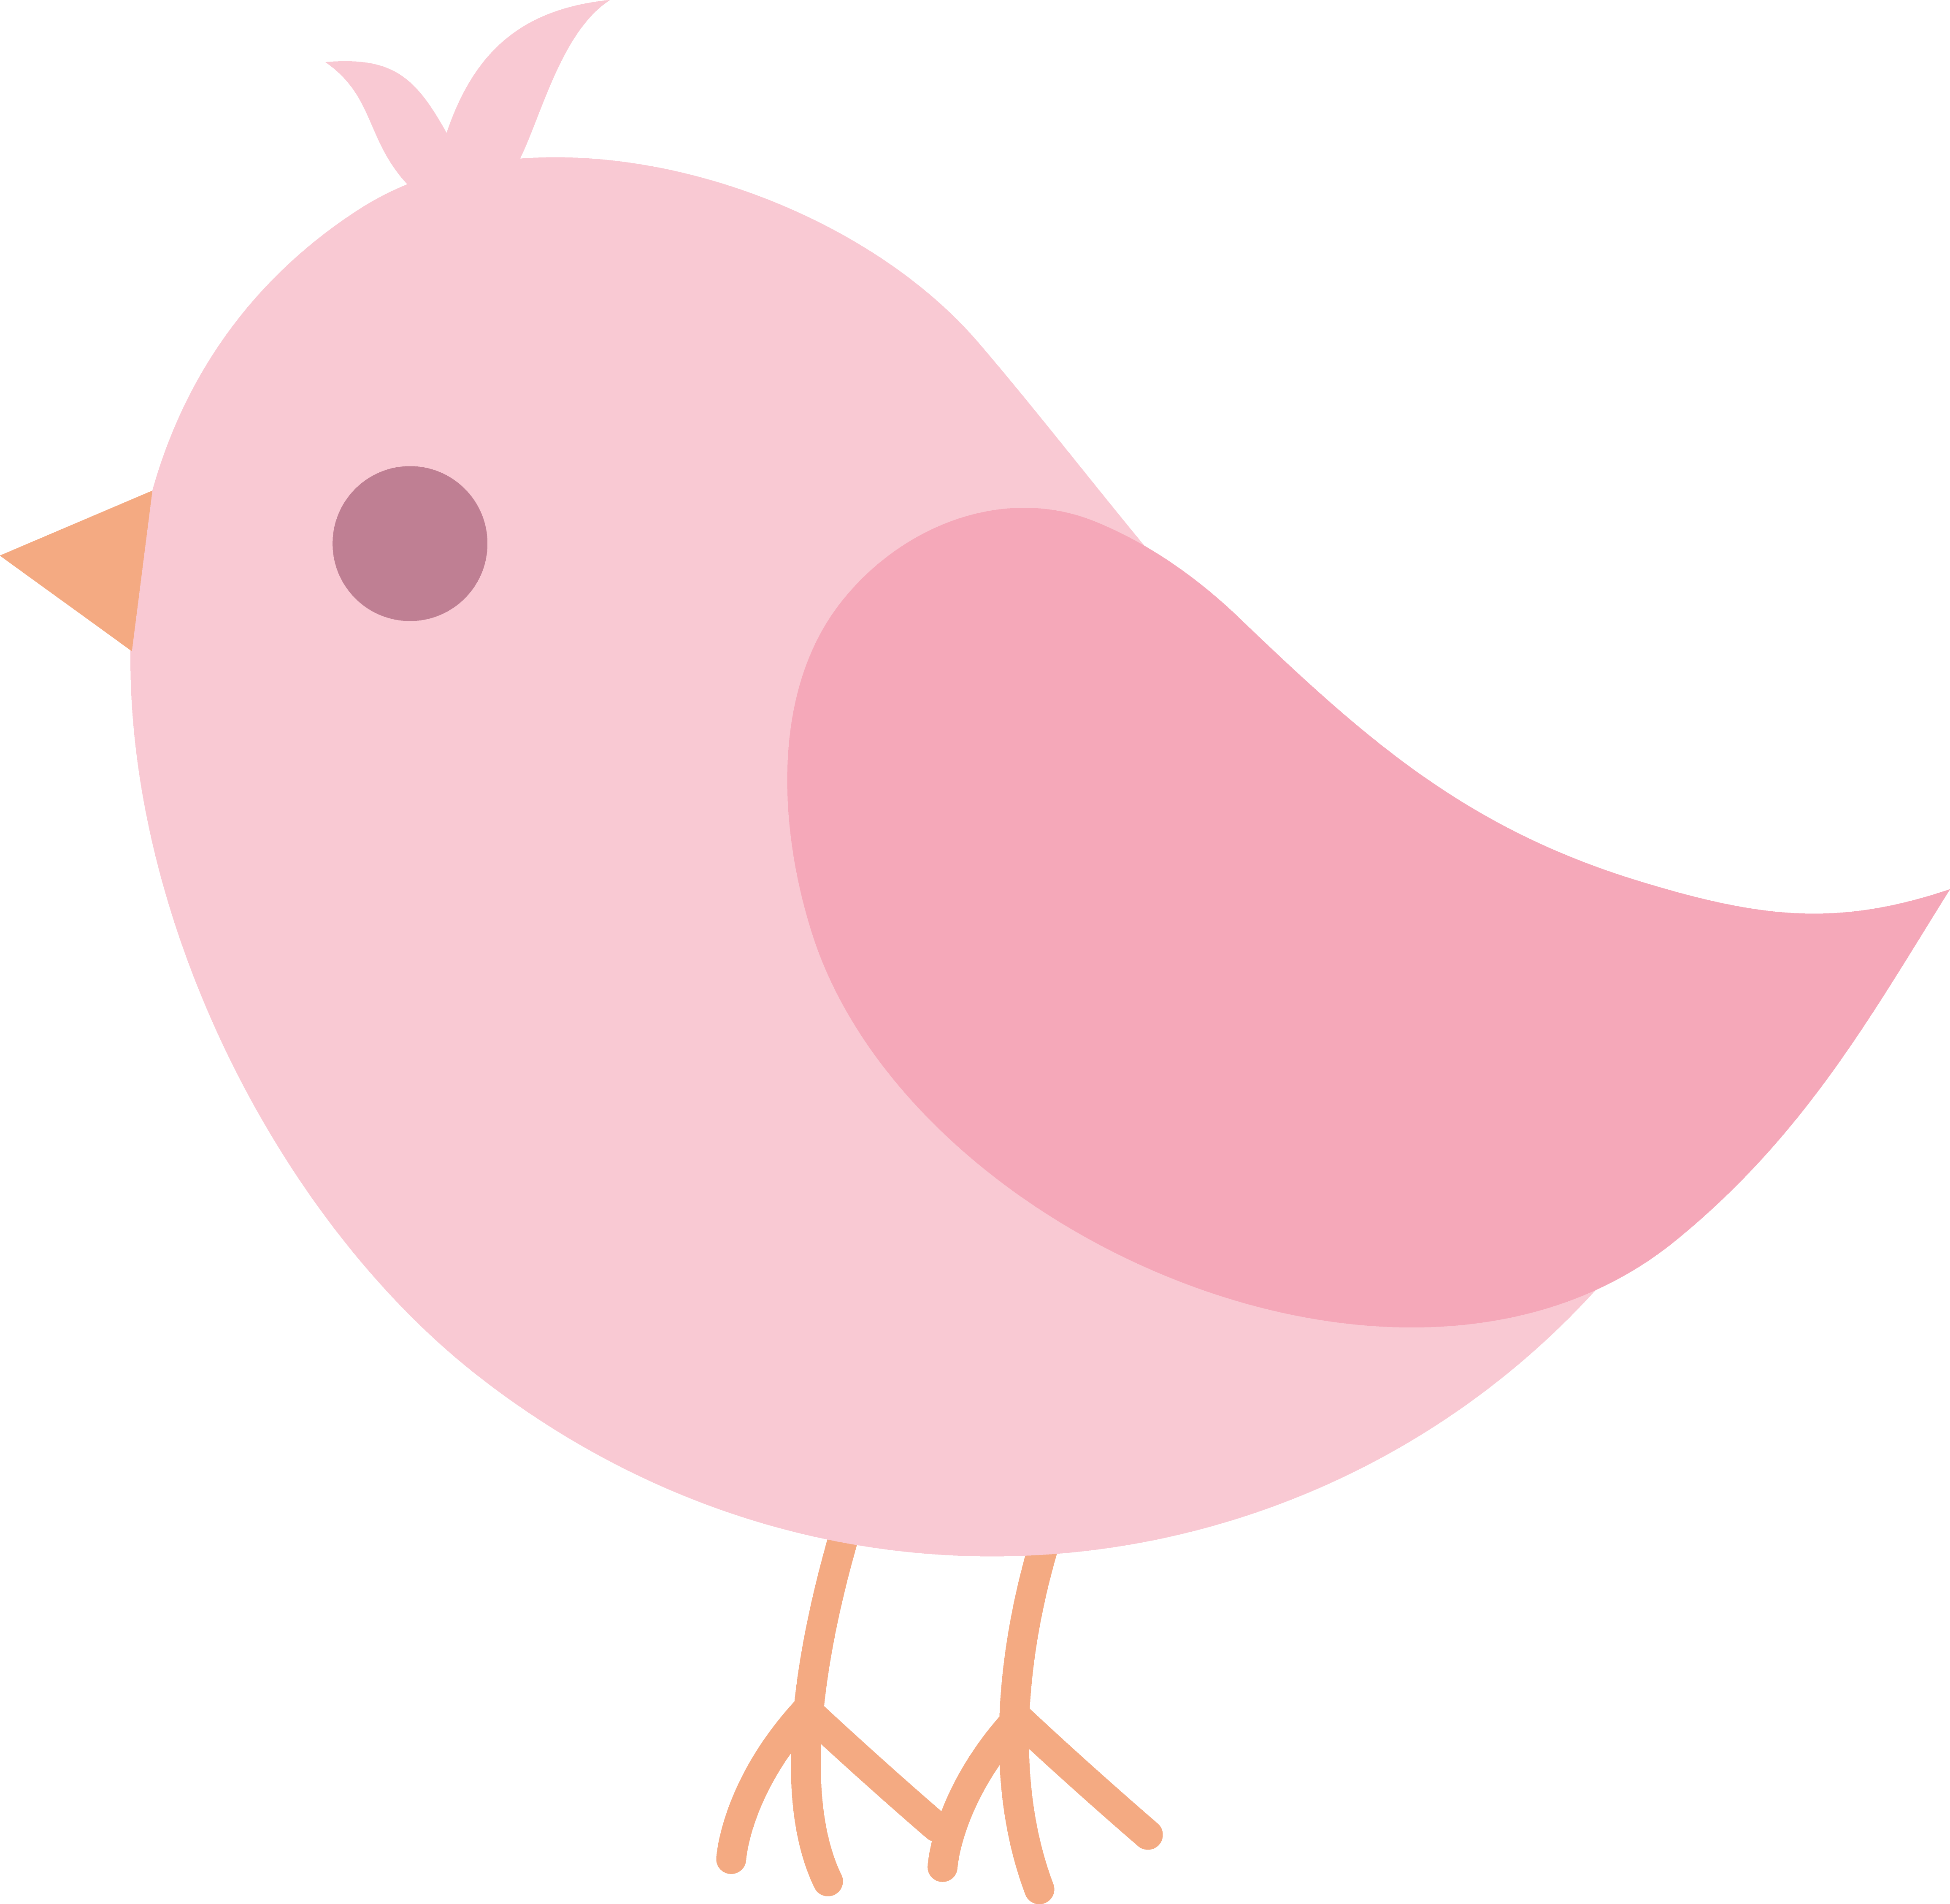 Cute pink song bird. Owl clipart shabby chic